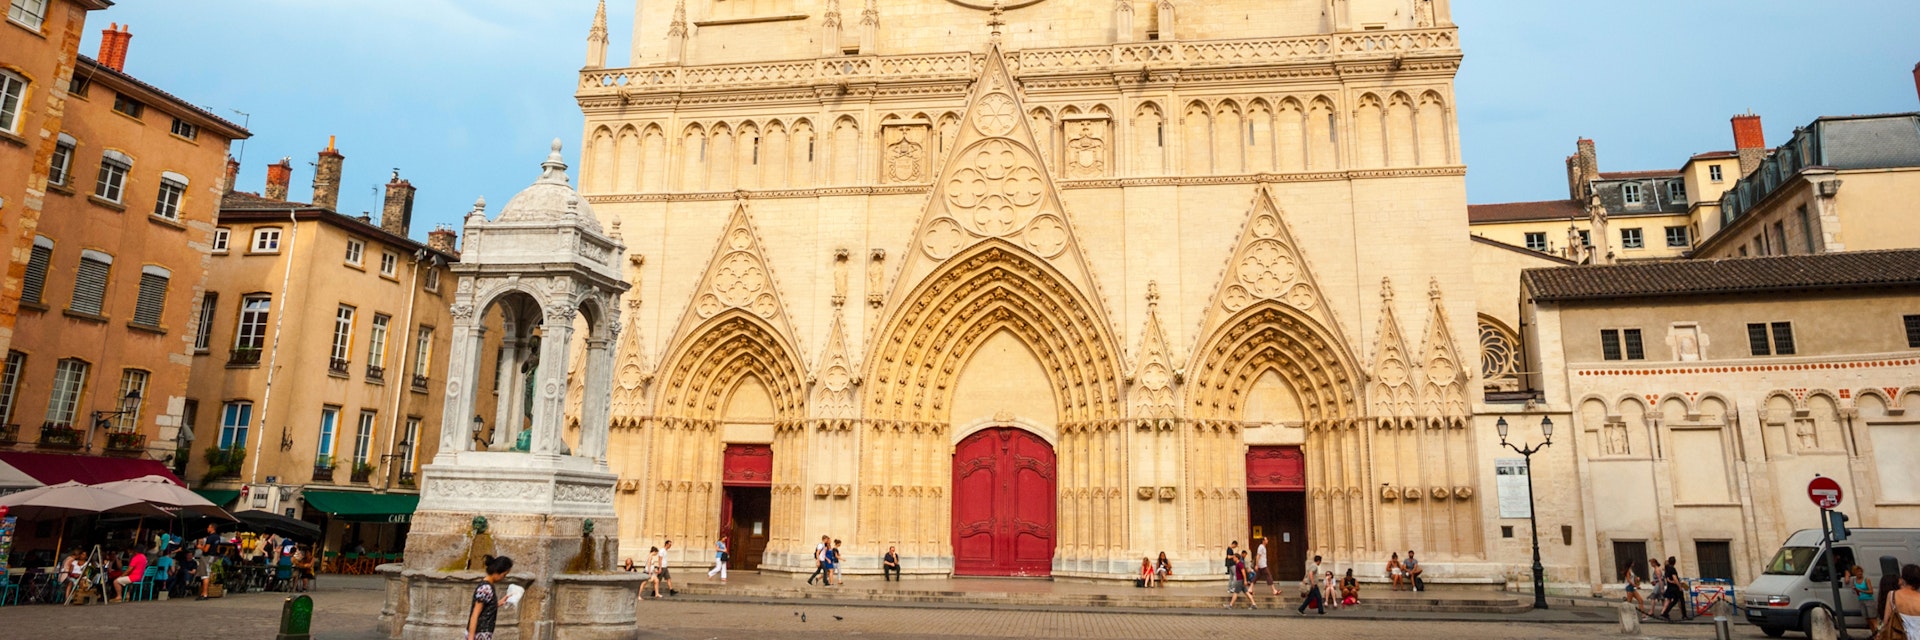 LYON, FRANCE - JUNE 5: Exterior of St. John the Baptist cathedal in Lyon downtown with people passing by. June 2015; Shutterstock ID 405341626; Your name (First / Last): Daniel Fahey; GL account no.: 65050; Netsuite department name: Online Editorial; Full Product or Project name including edition: Lyon BiT